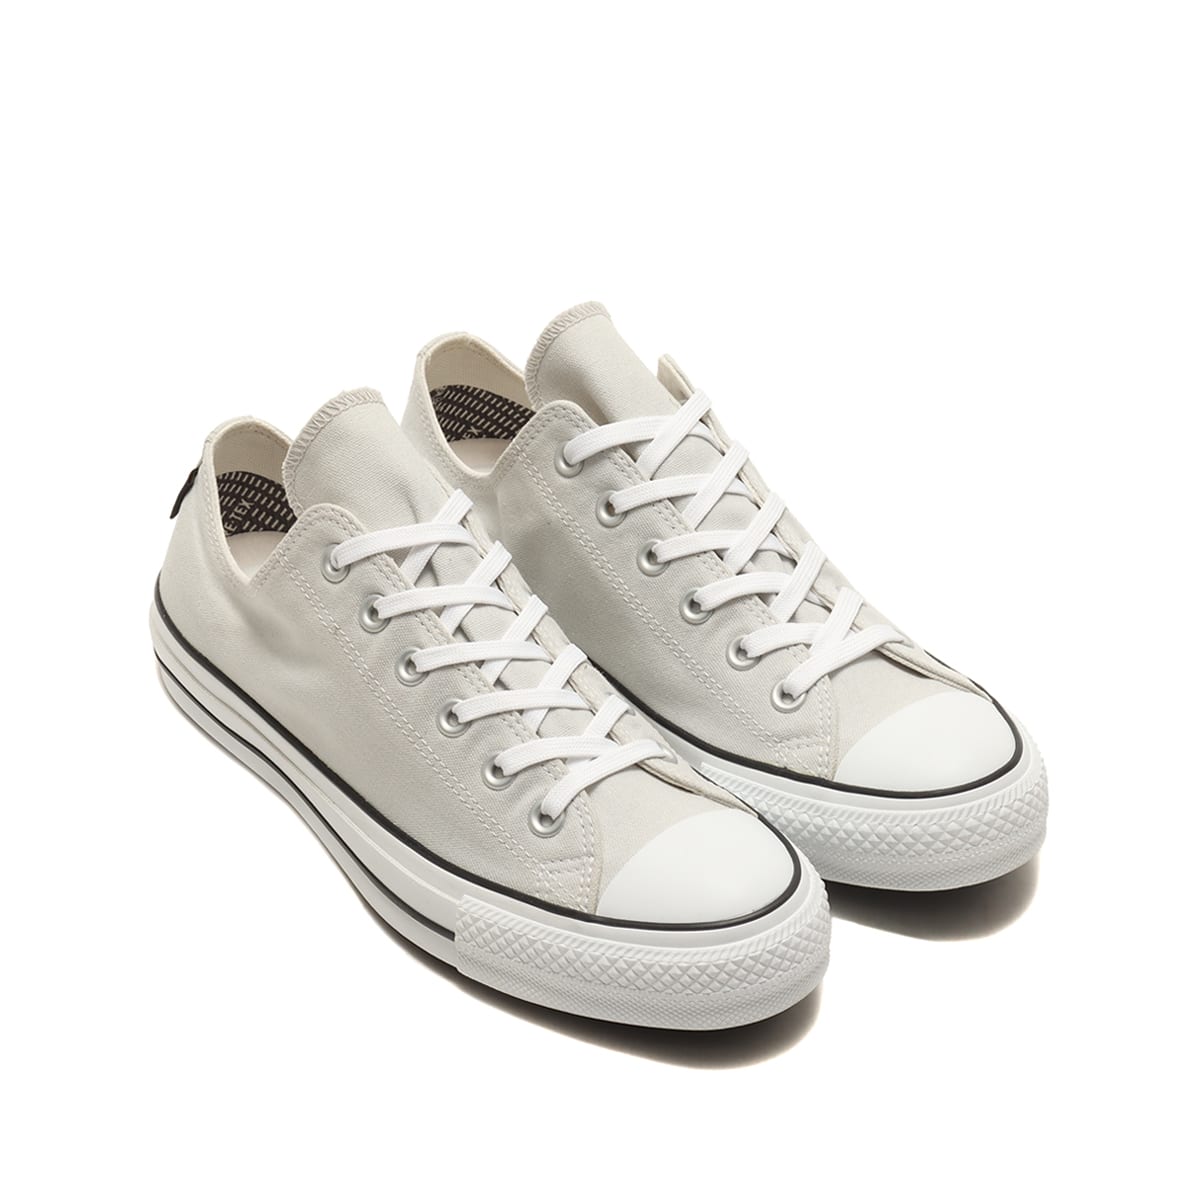 CONVERSE ALL STAR 100 GORE-TEX OX GREY 21SS-I_photo_large